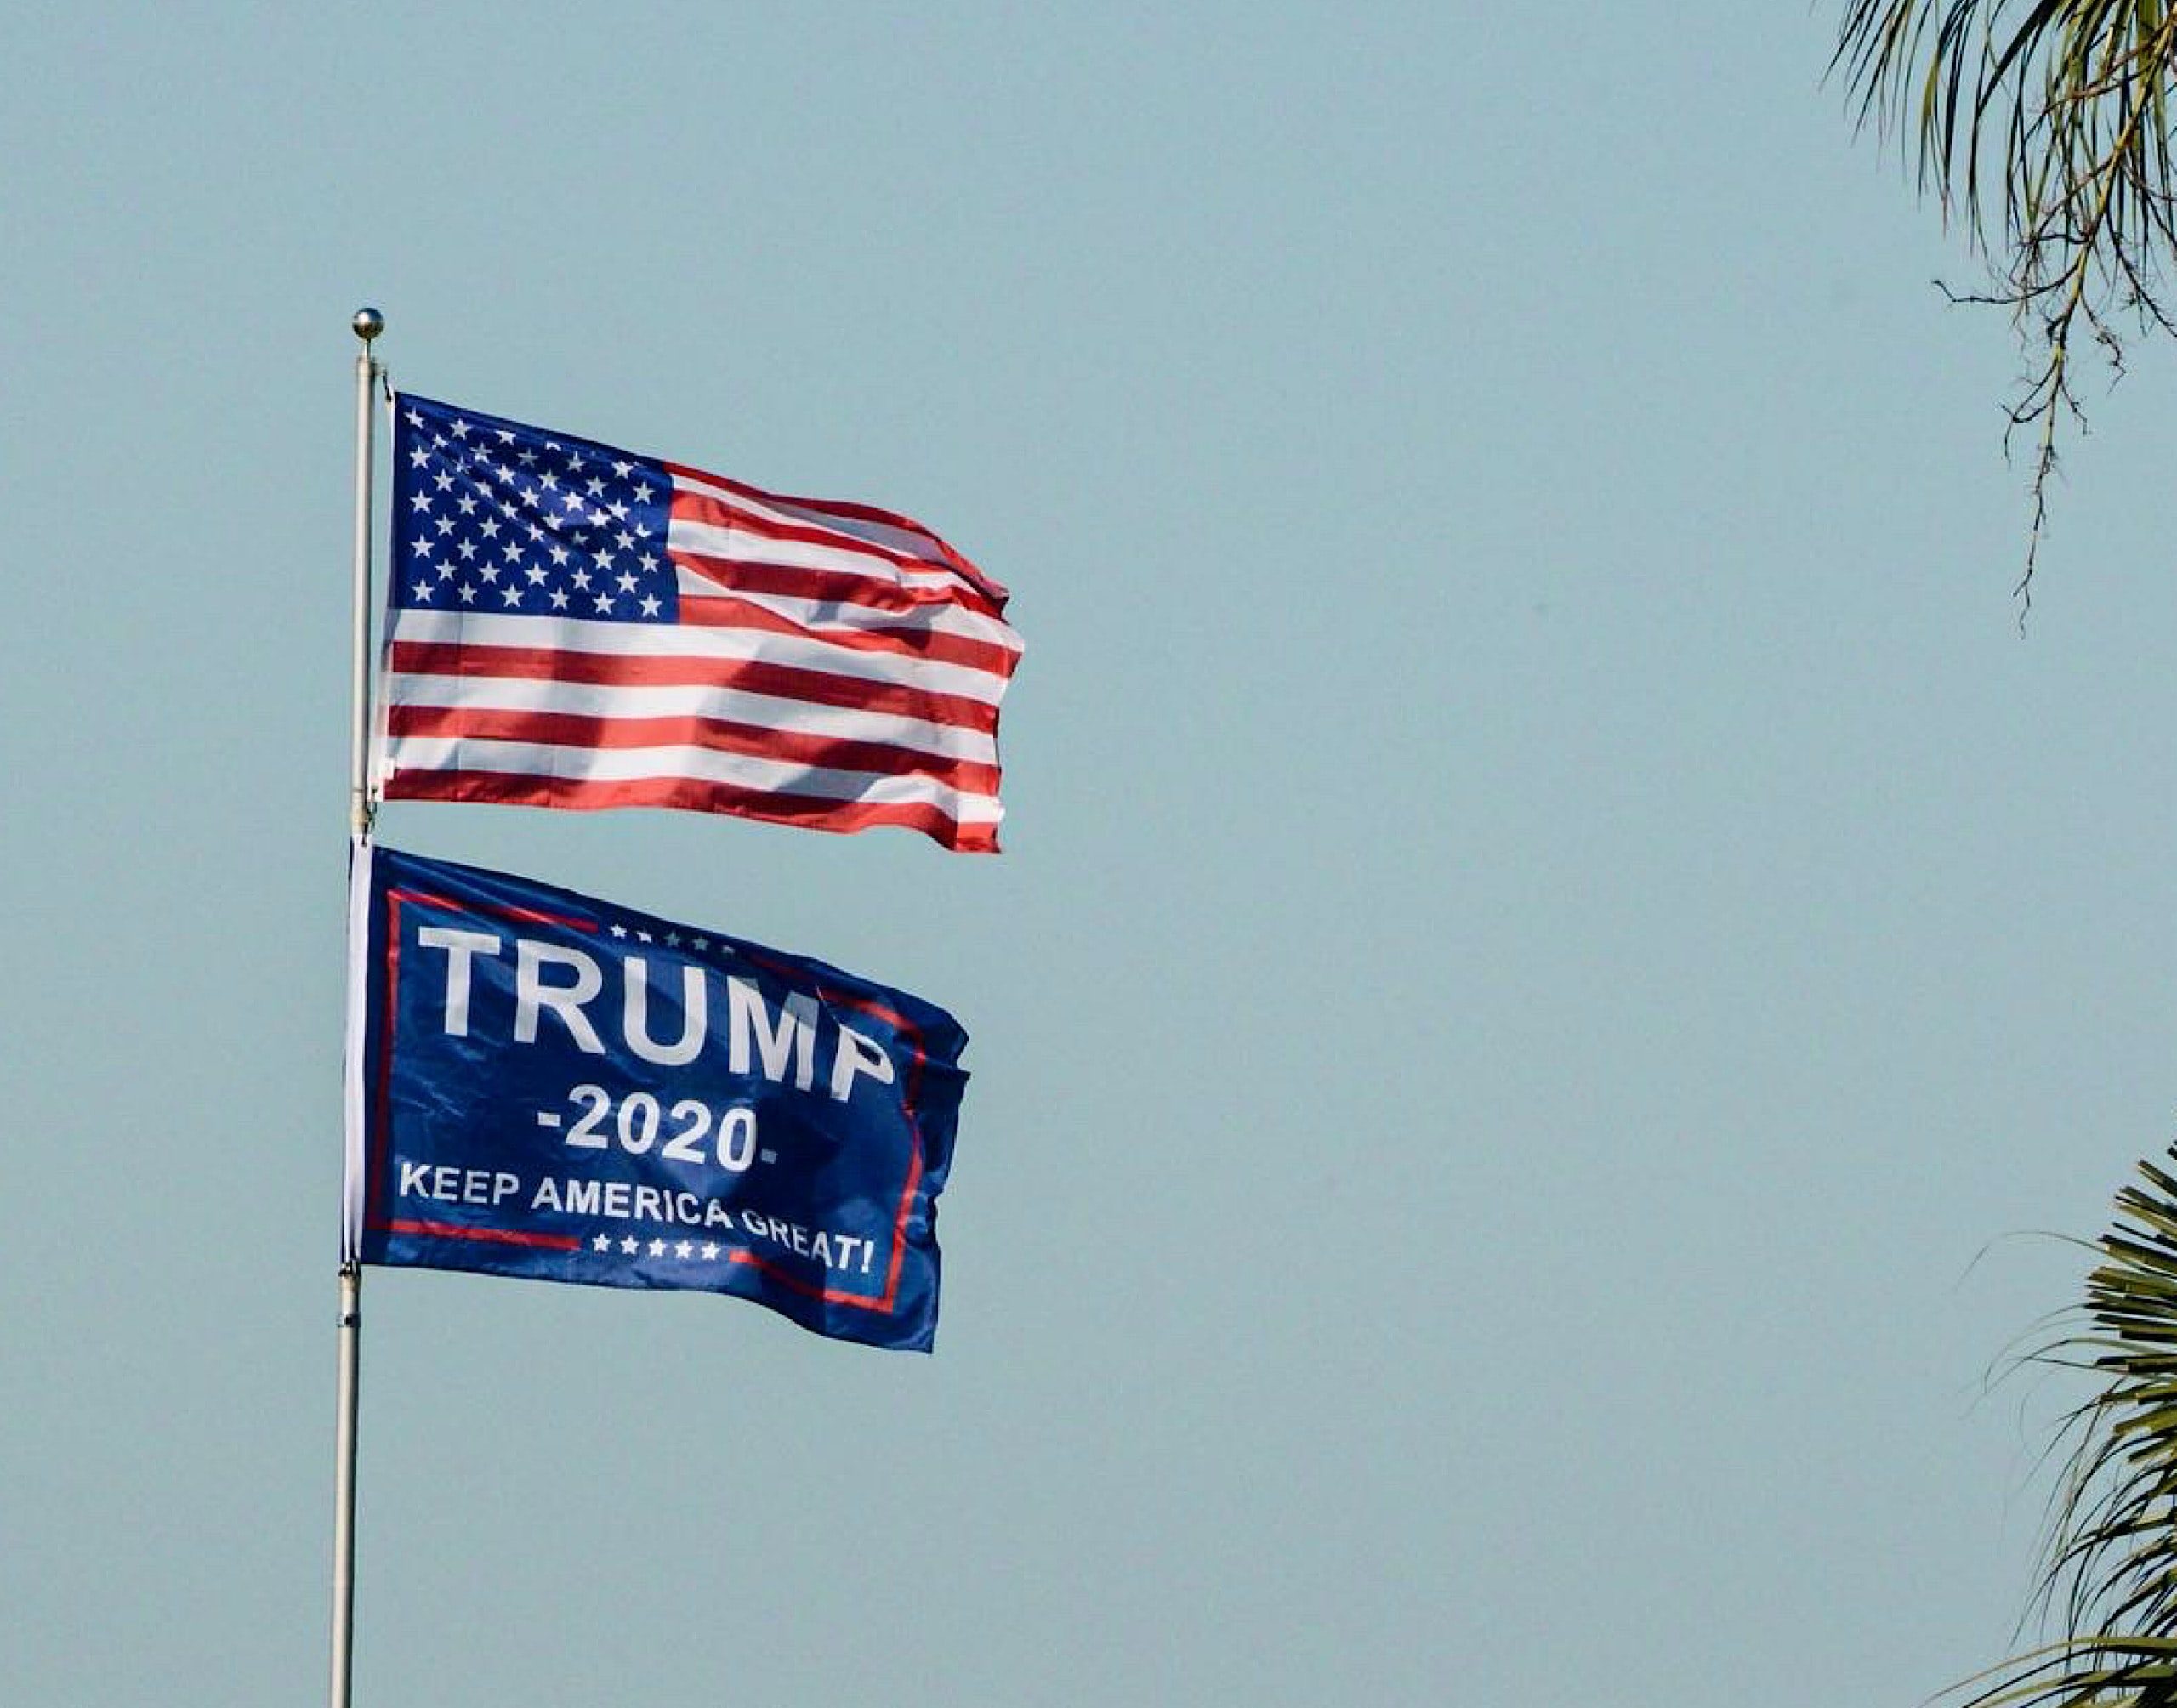 Photo showing an American flag and a Trump 2020 flag